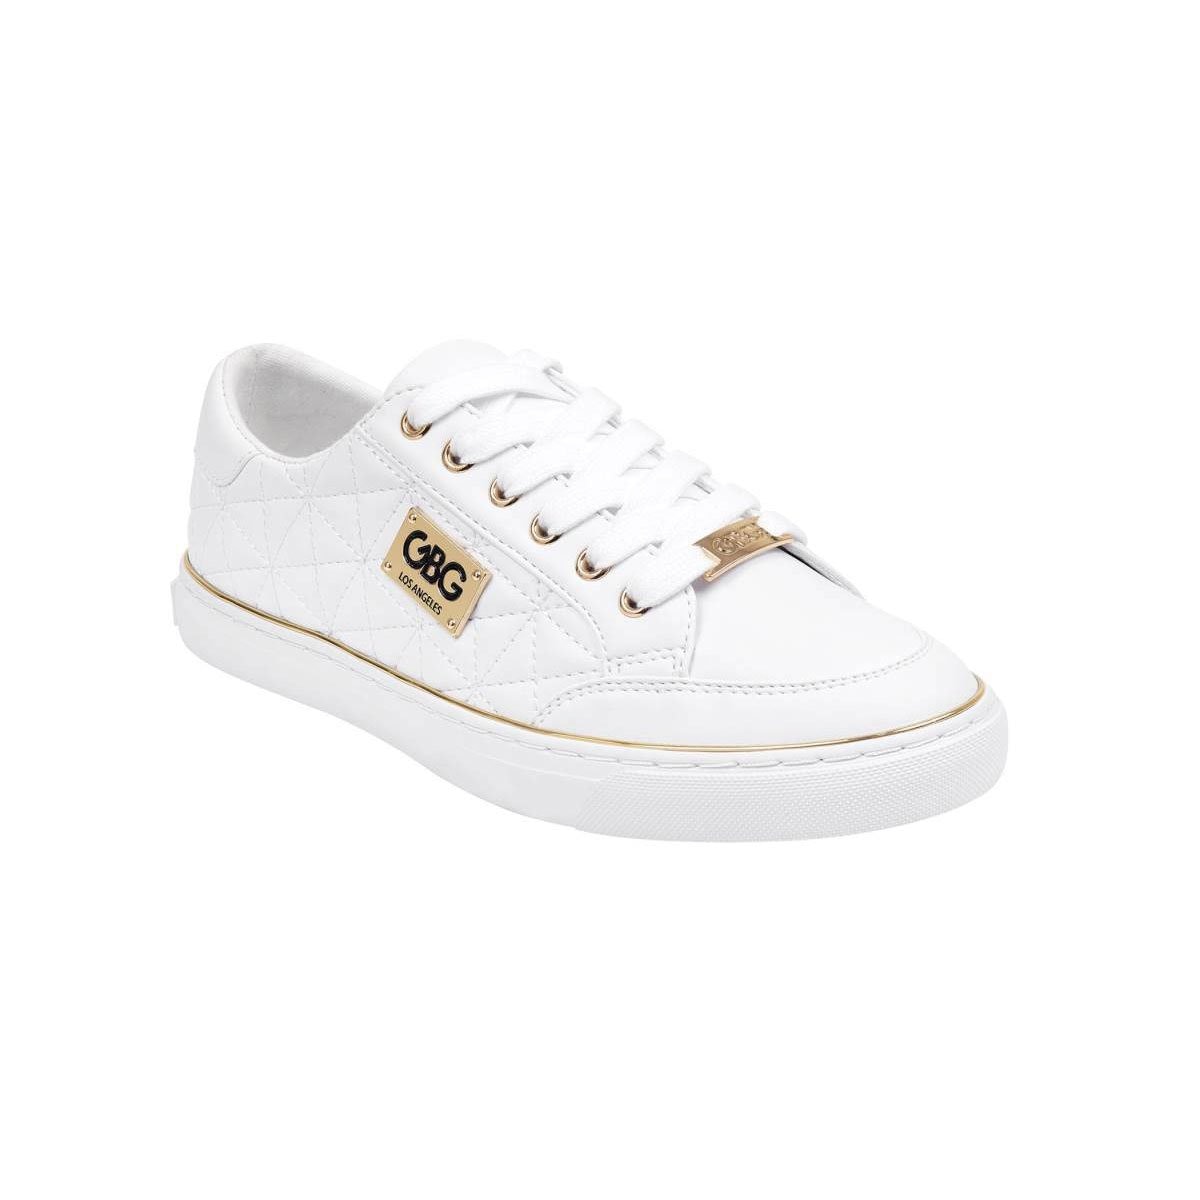 Tenis flat blanco g by guess - Sears